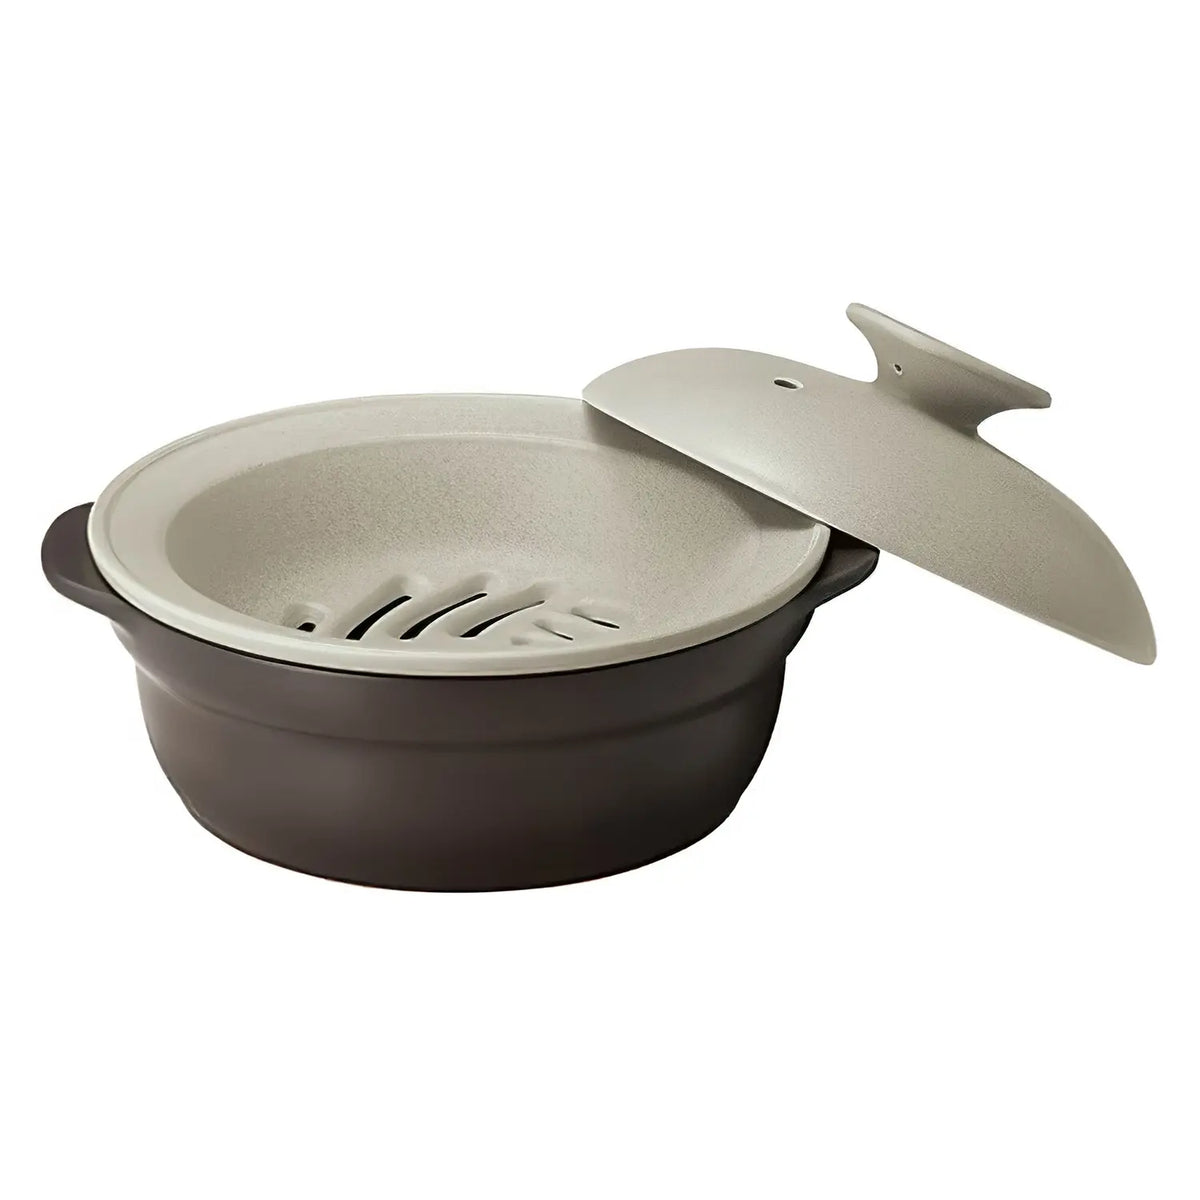 M.STYLE Karl Ceramic Induction Donabe Casserole and Steamer Insert